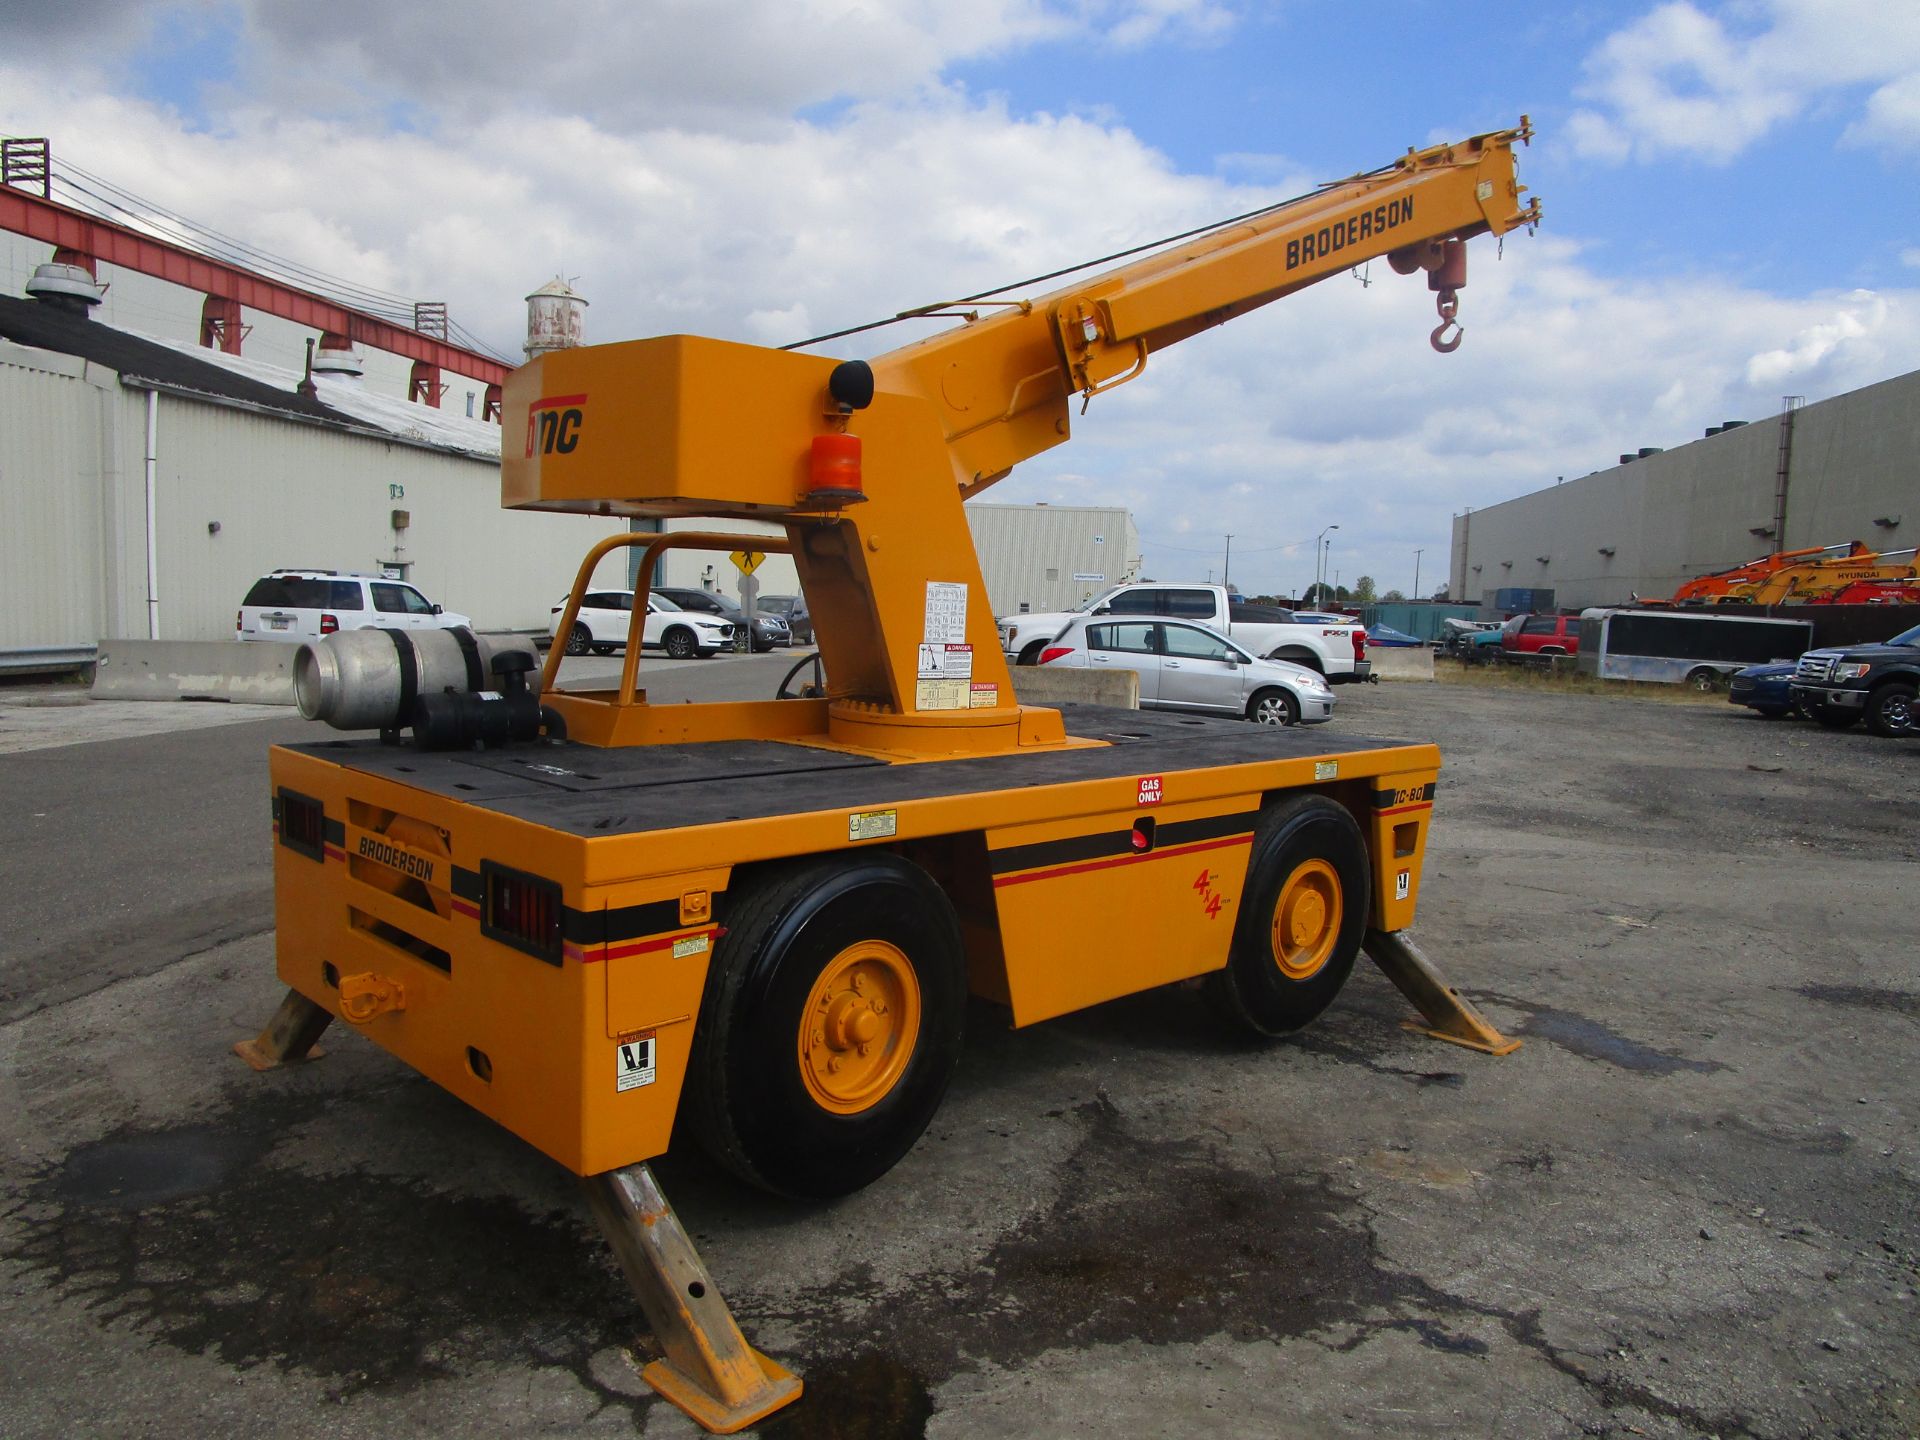 Broderson IC-80-3G Crane - Located in Lester, PA - Image 15 of 24